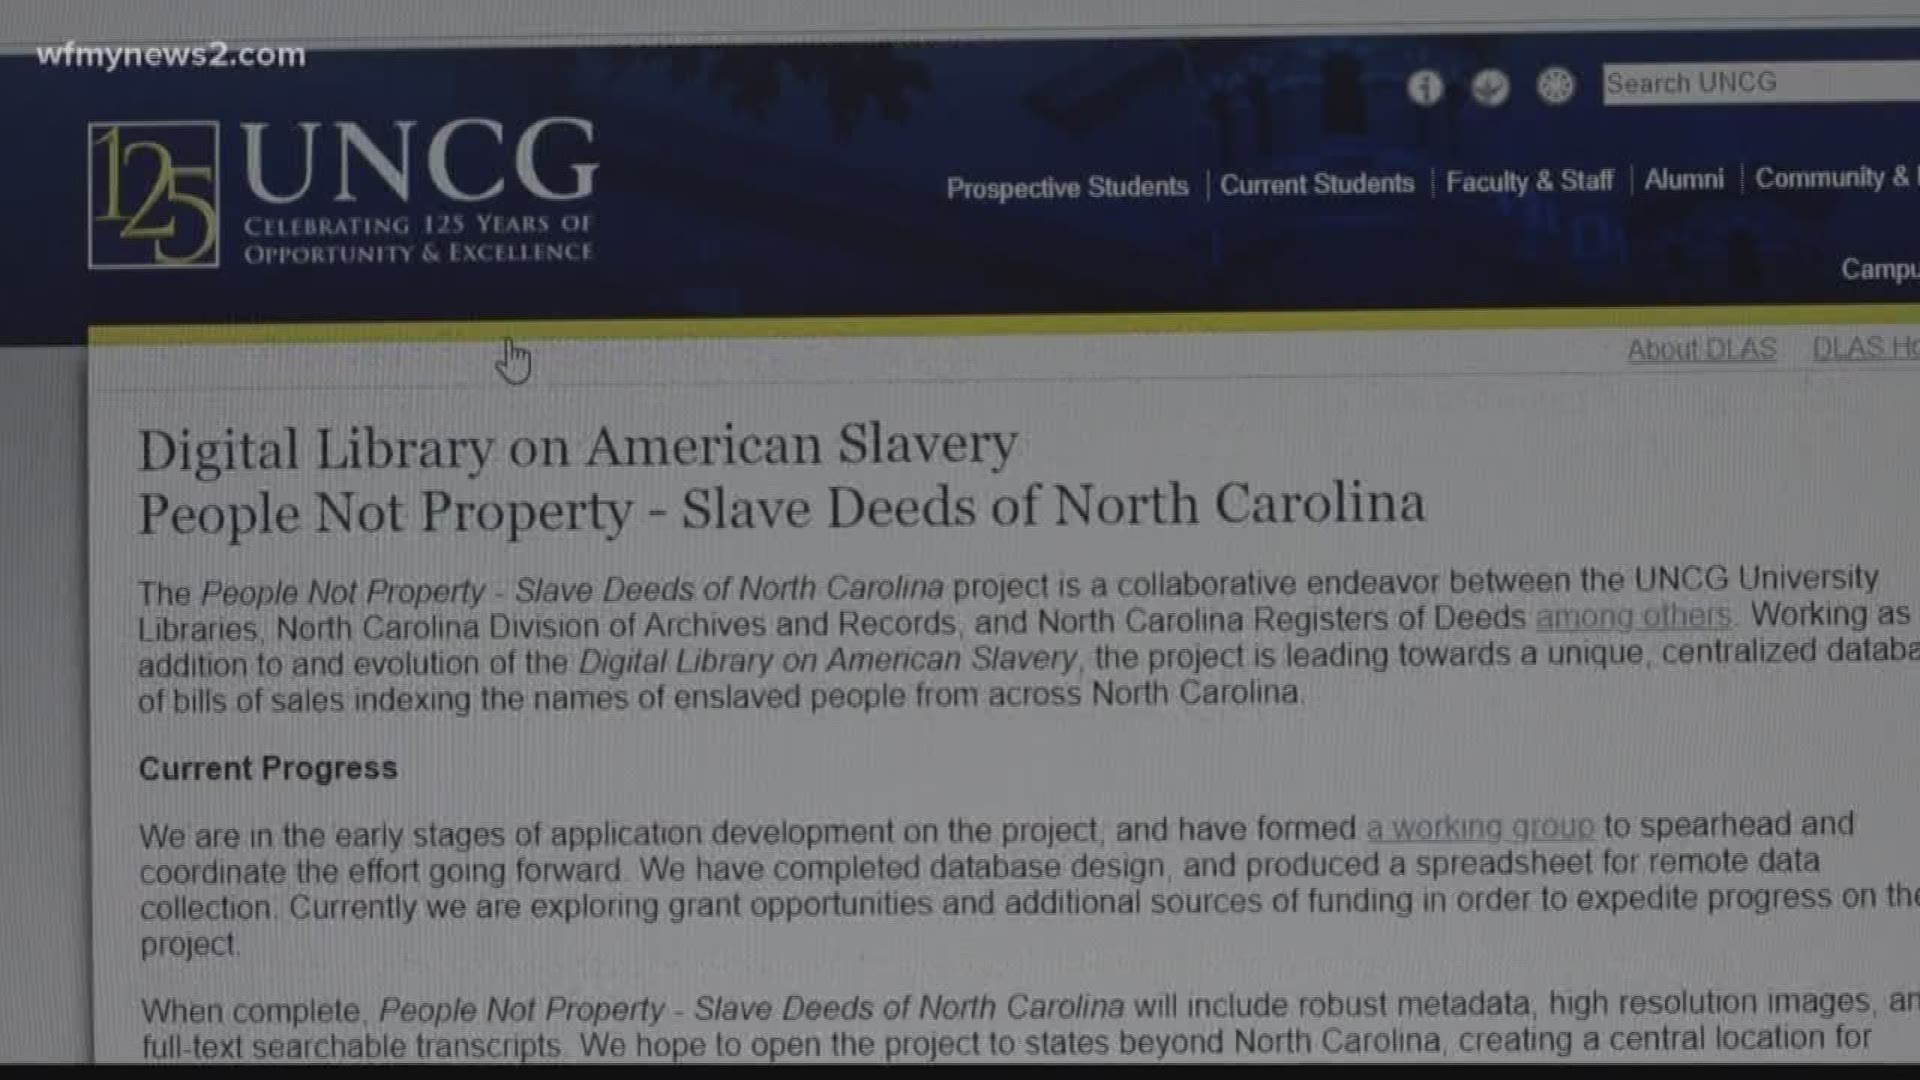 UNC Greensboro (UNCG) received a grant from the National Historic Publications and Records Commissio to digitize nearly 10,000 slave deeds and bills of sale from 26 counties in North Carolina.